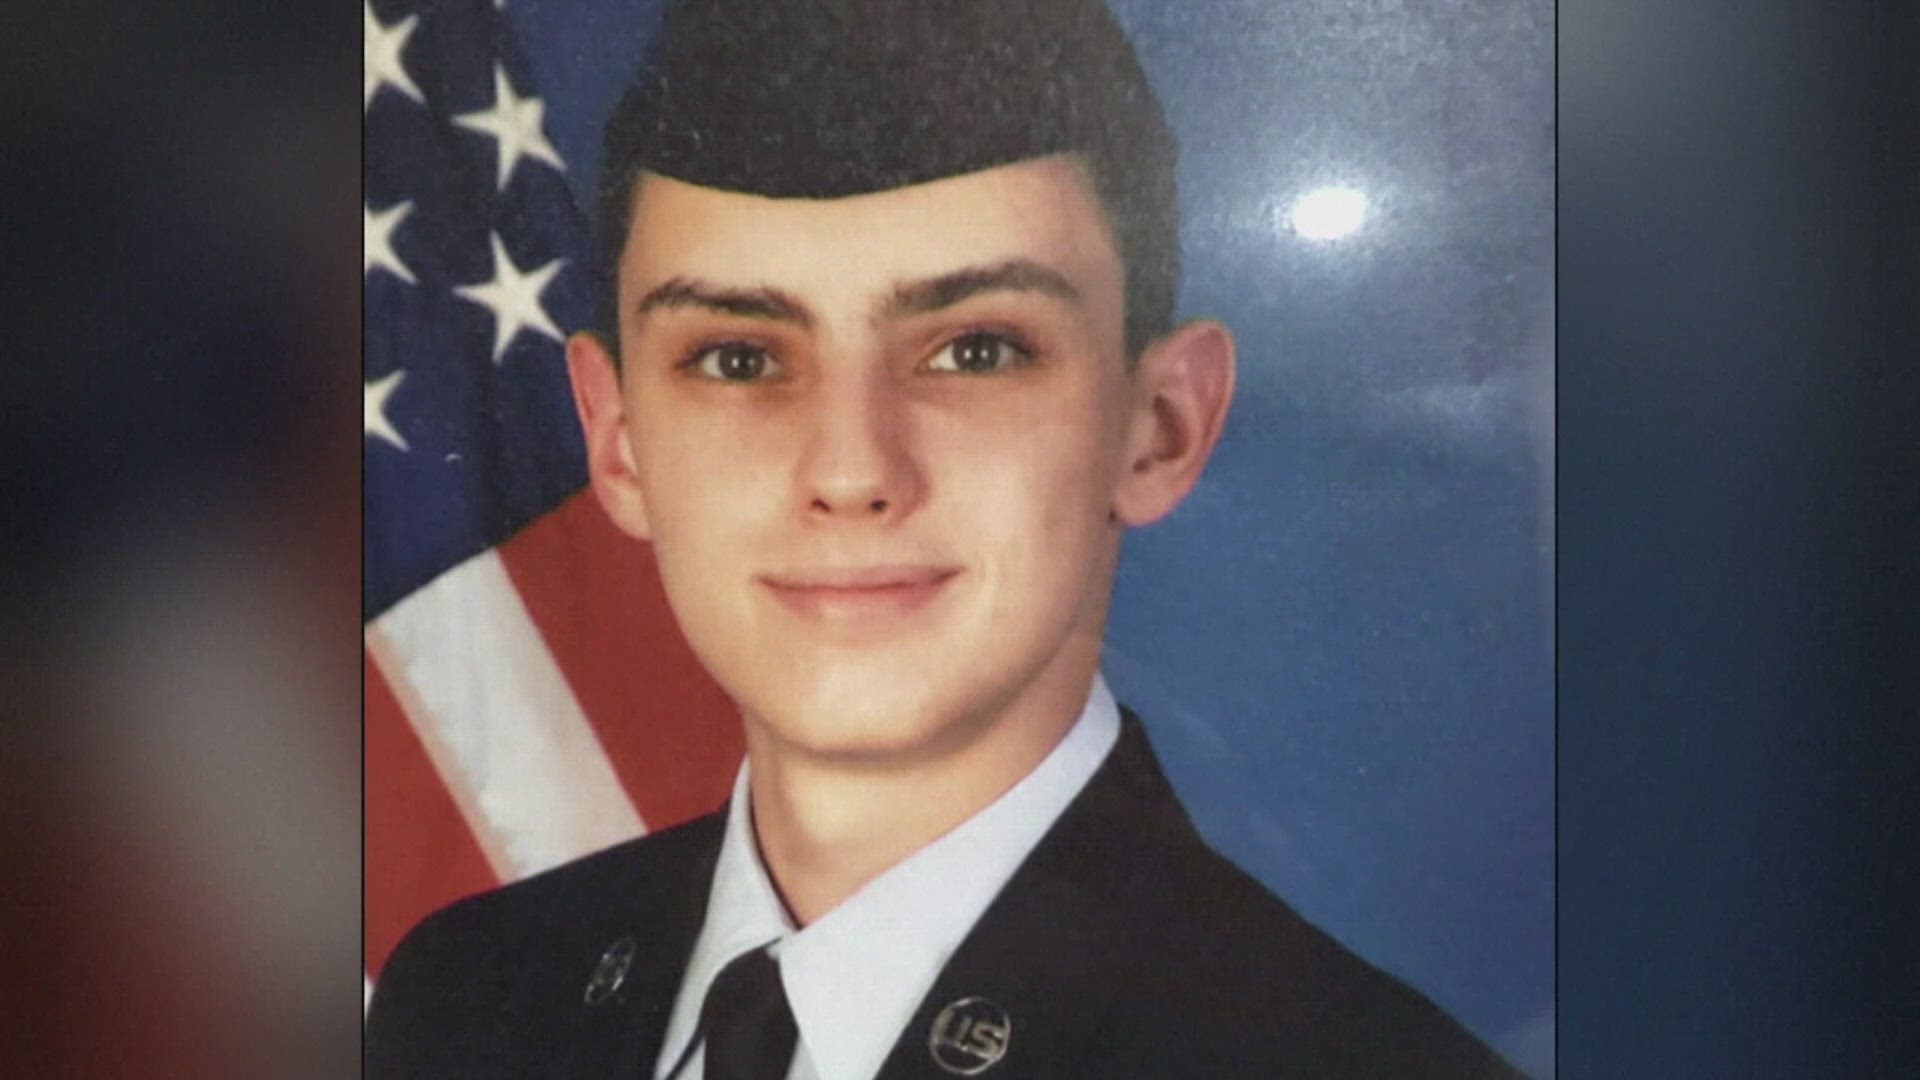 The Massachusetts Air National Guardsman who is charged was allegedly caught improperly handling military secrets on three occasions before his arrest.